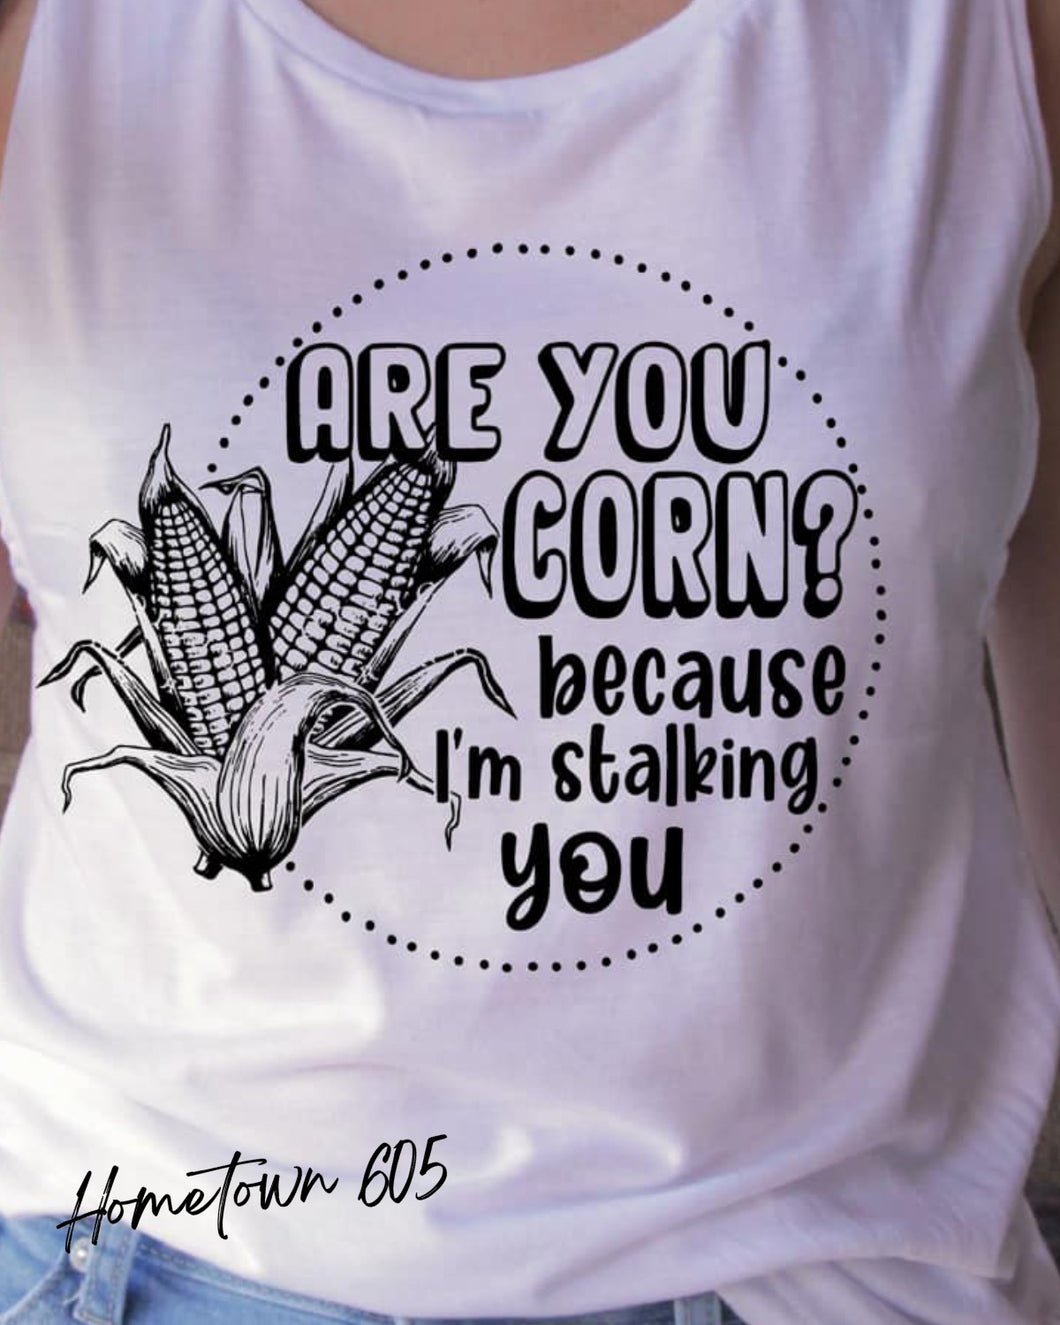 Are you corn? because I'm stalking you t-shirt, graphic tee, sarcastic